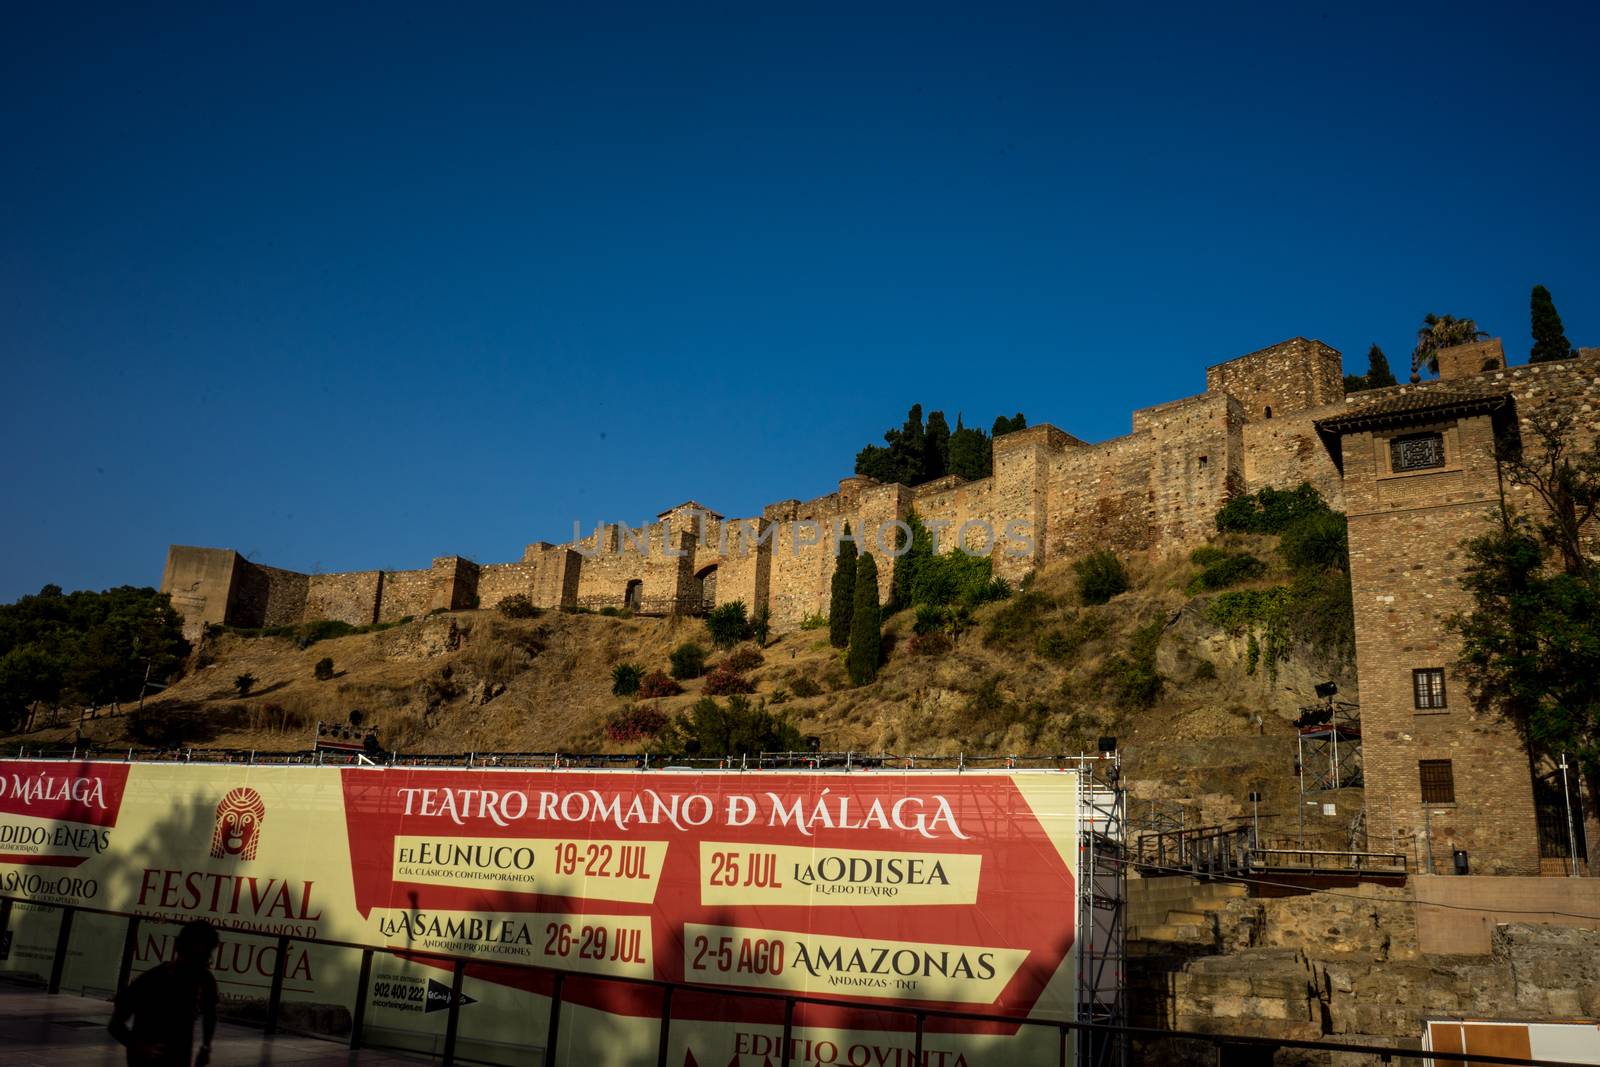 Roman theater, Malaga, Costa del Sol, Spain, Europe on a bright summer day with blue sky